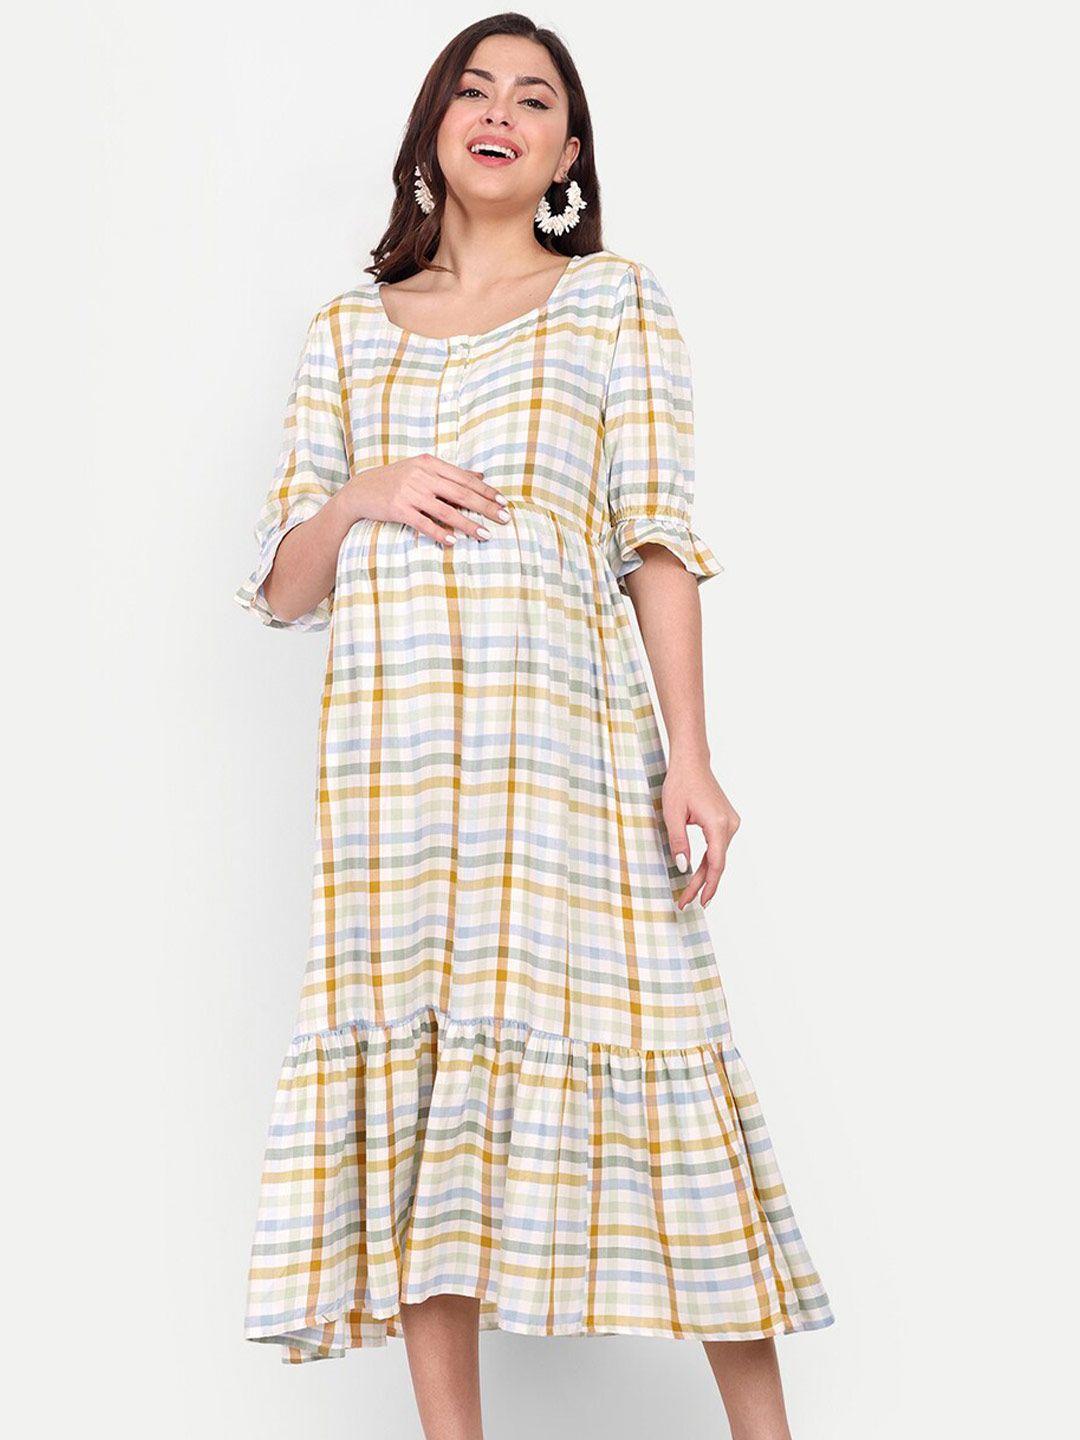 aaruvi-ruchi-verma-checked-maternity-a-line-dress